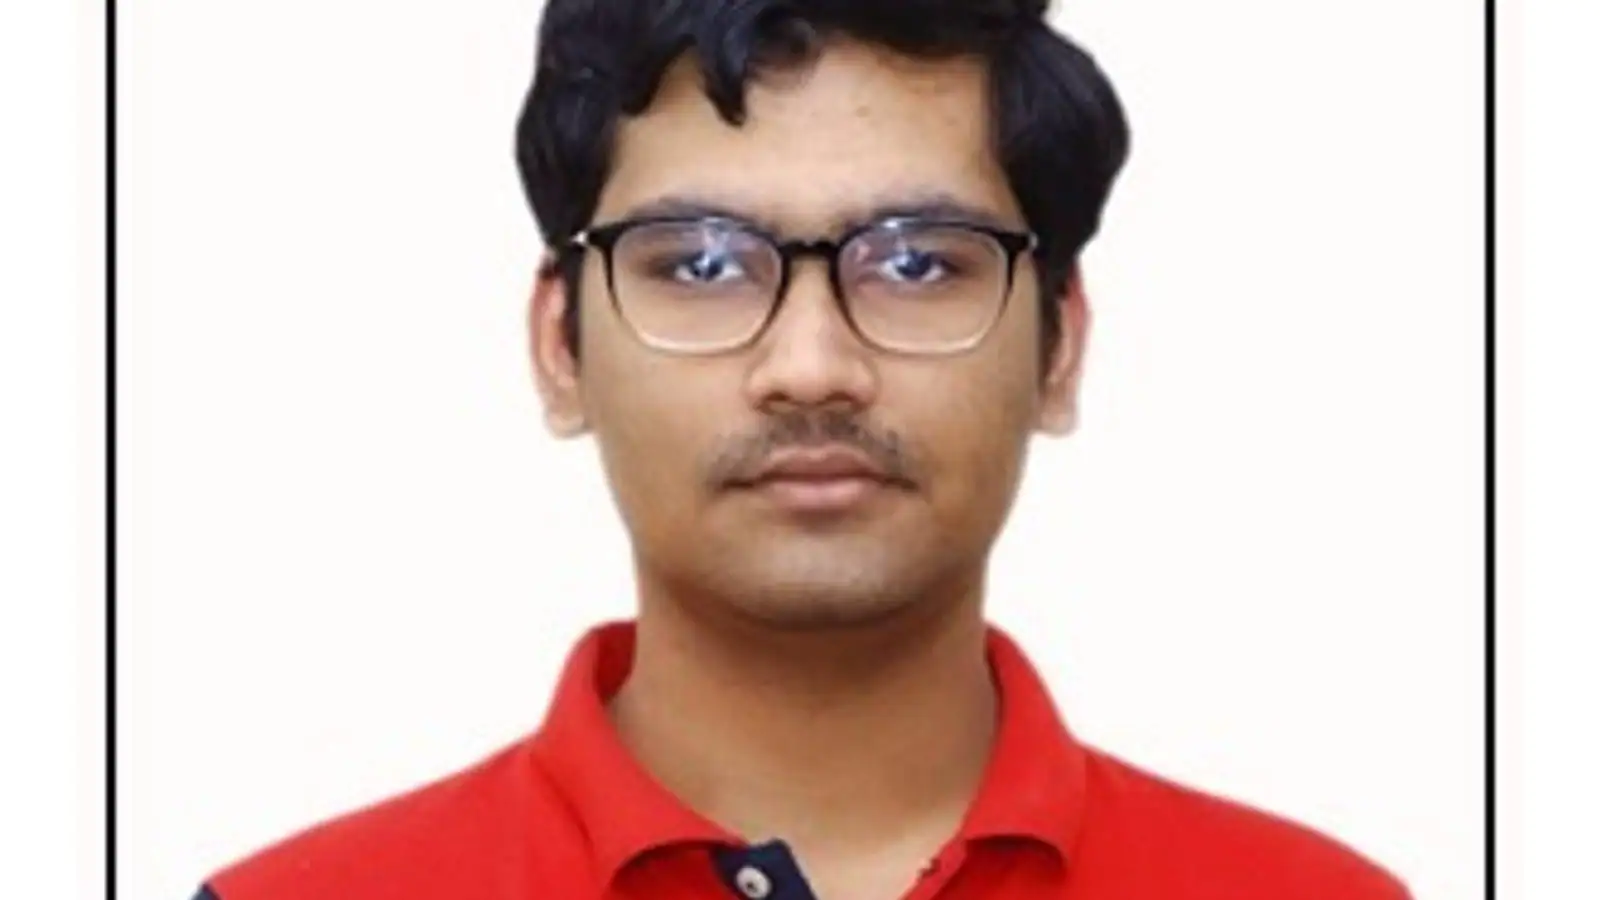  JEE Main 2022 Topper Says Music Helped Prepare Better, Aims at Pursuing Research in AI, Robotics